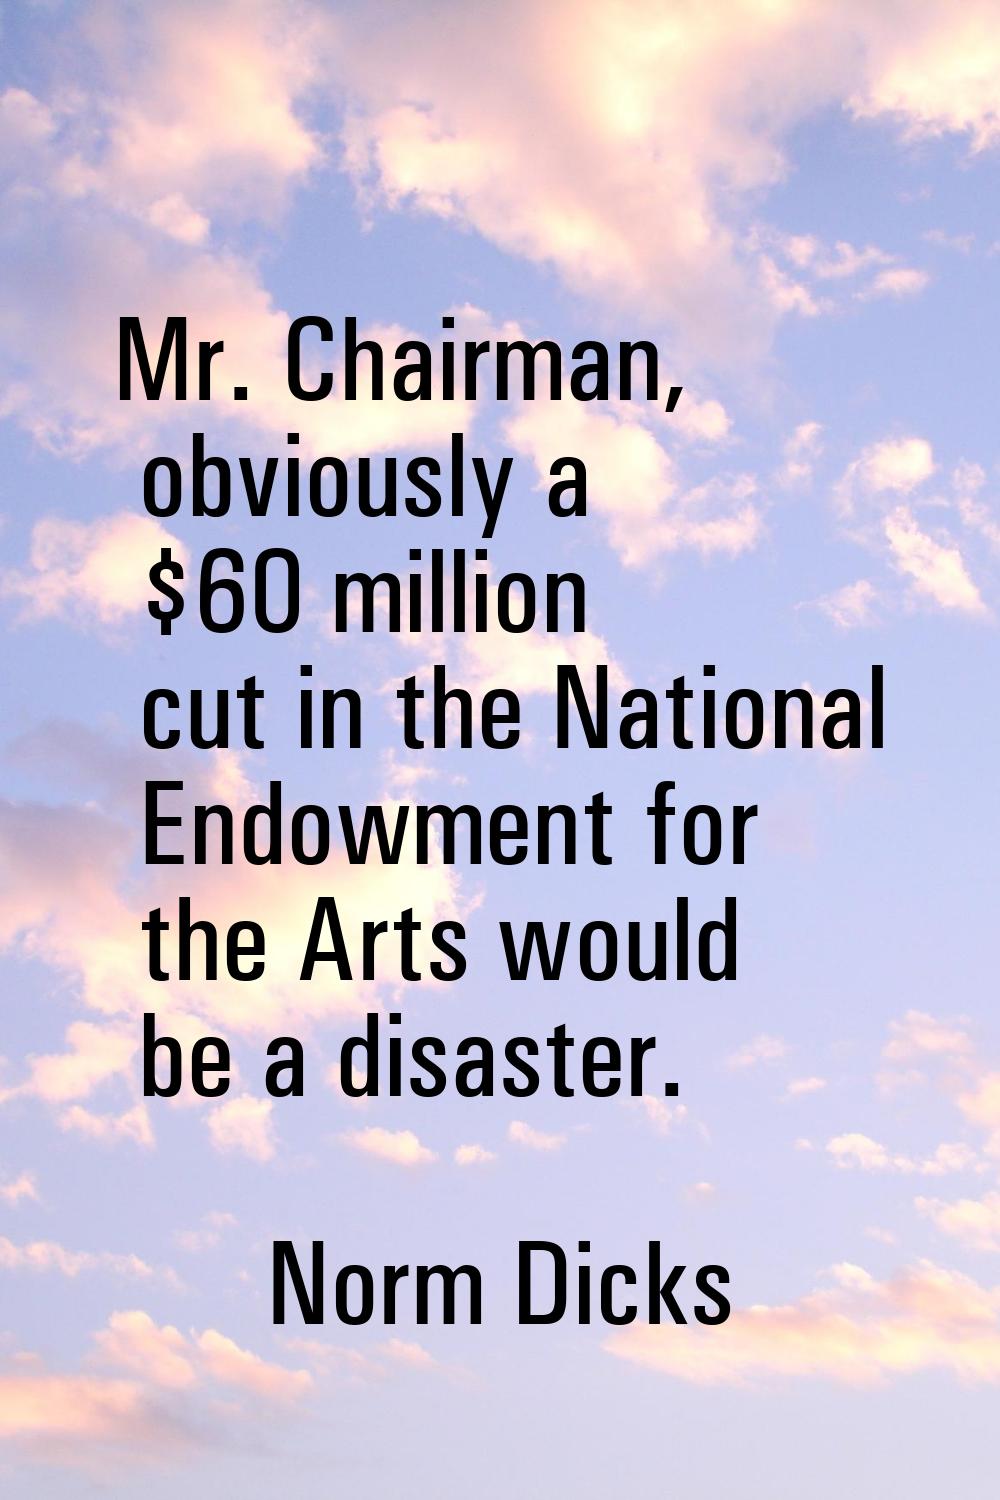 Mr. Chairman, obviously a $60 million cut in the National Endowment for the Arts would be a disaste